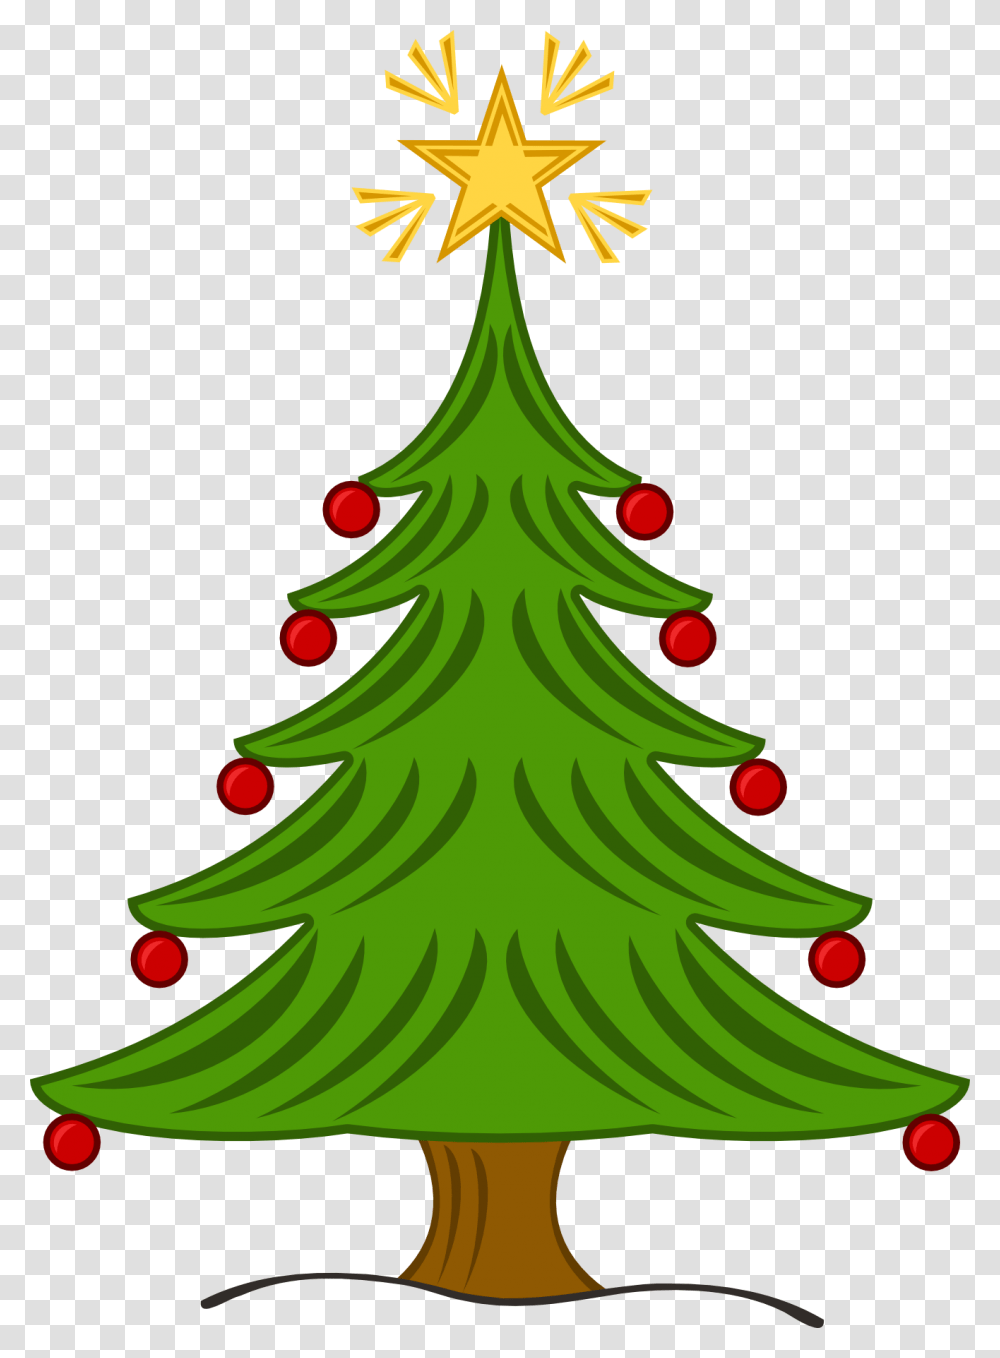 Christmas Tree Clipart Black And White Free Download Clipart Christmas Tree, Plant, Ornament, Star Symbol,  Transparent Png